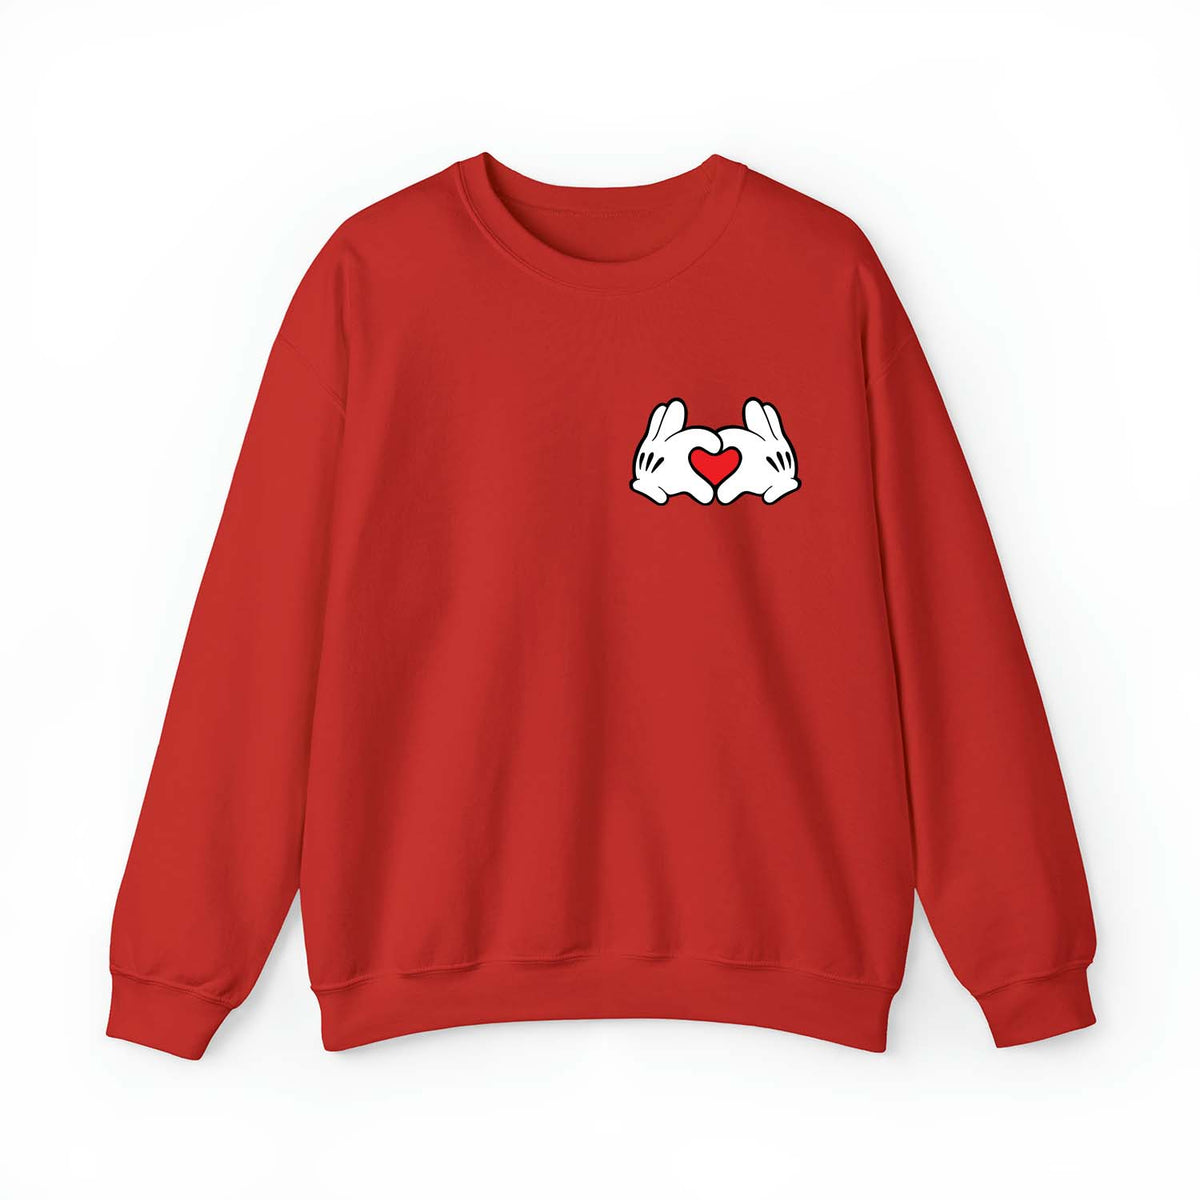 red-sweatshirt-with-pocket-size-mickey-sign-heart